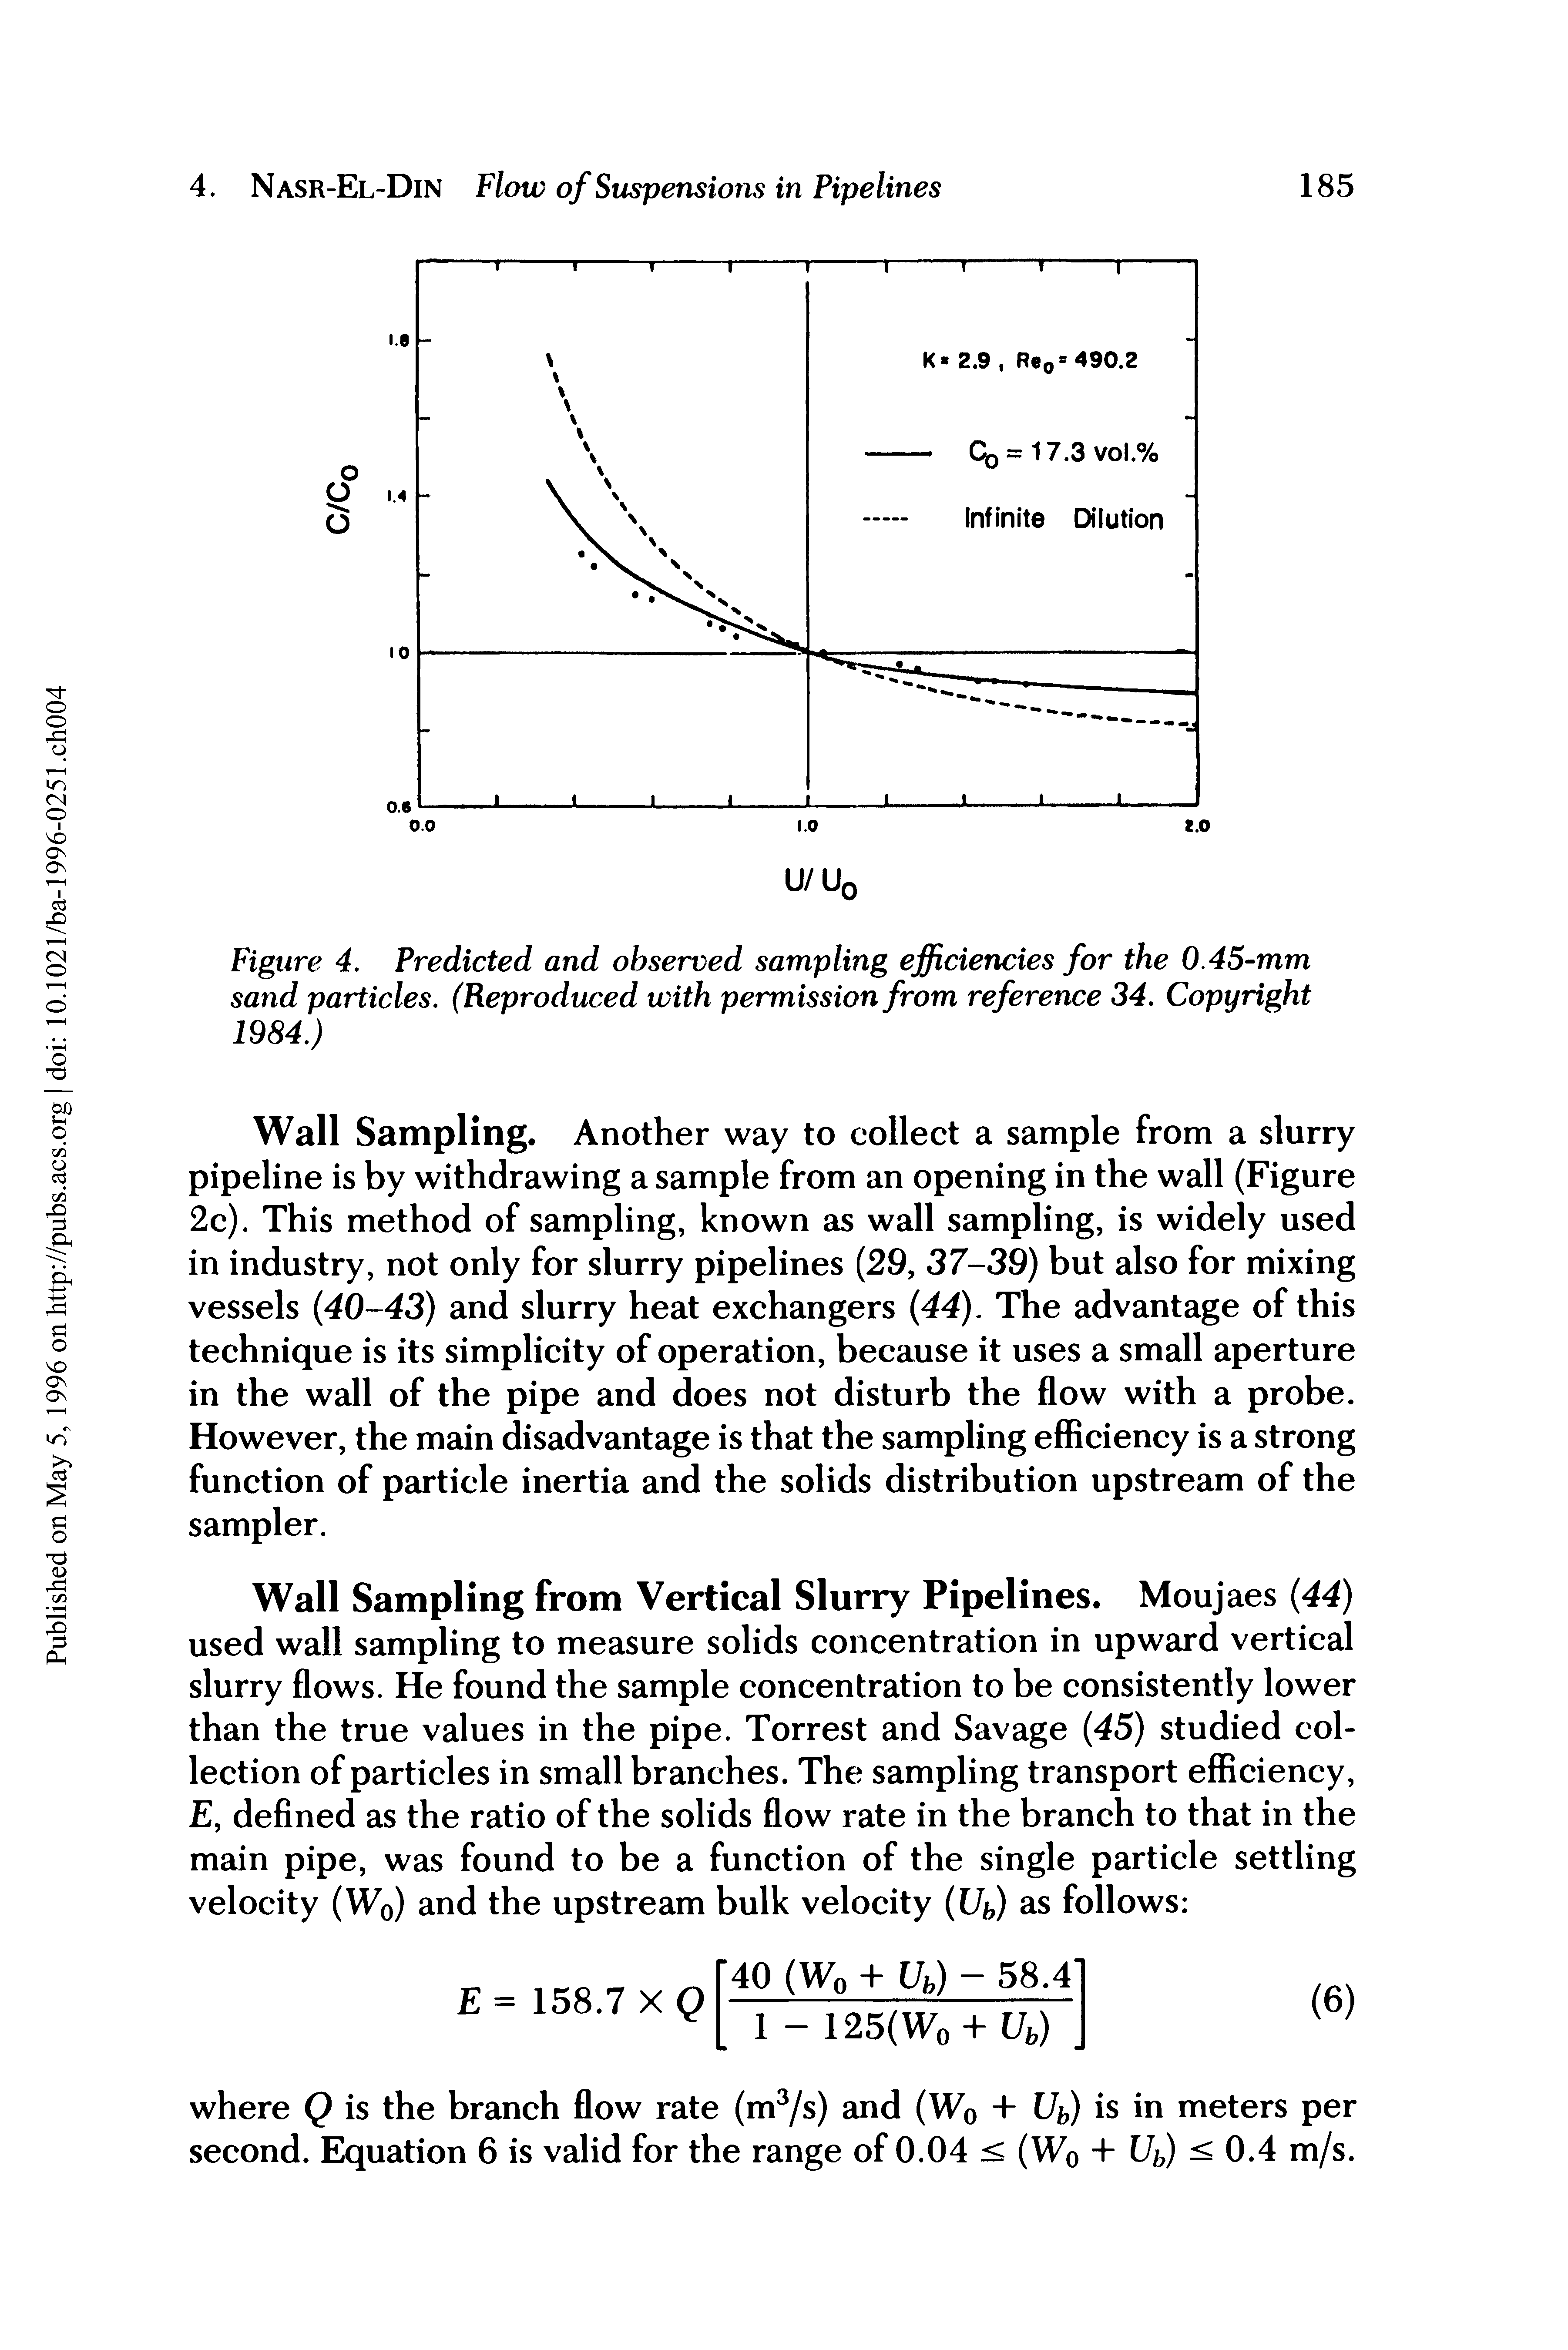 Figure 4. Predicted and observed sampling efficiencies for the 0.45-mm sand particles. (Reproduced with permission from reference 34. Copyright 1984.)...